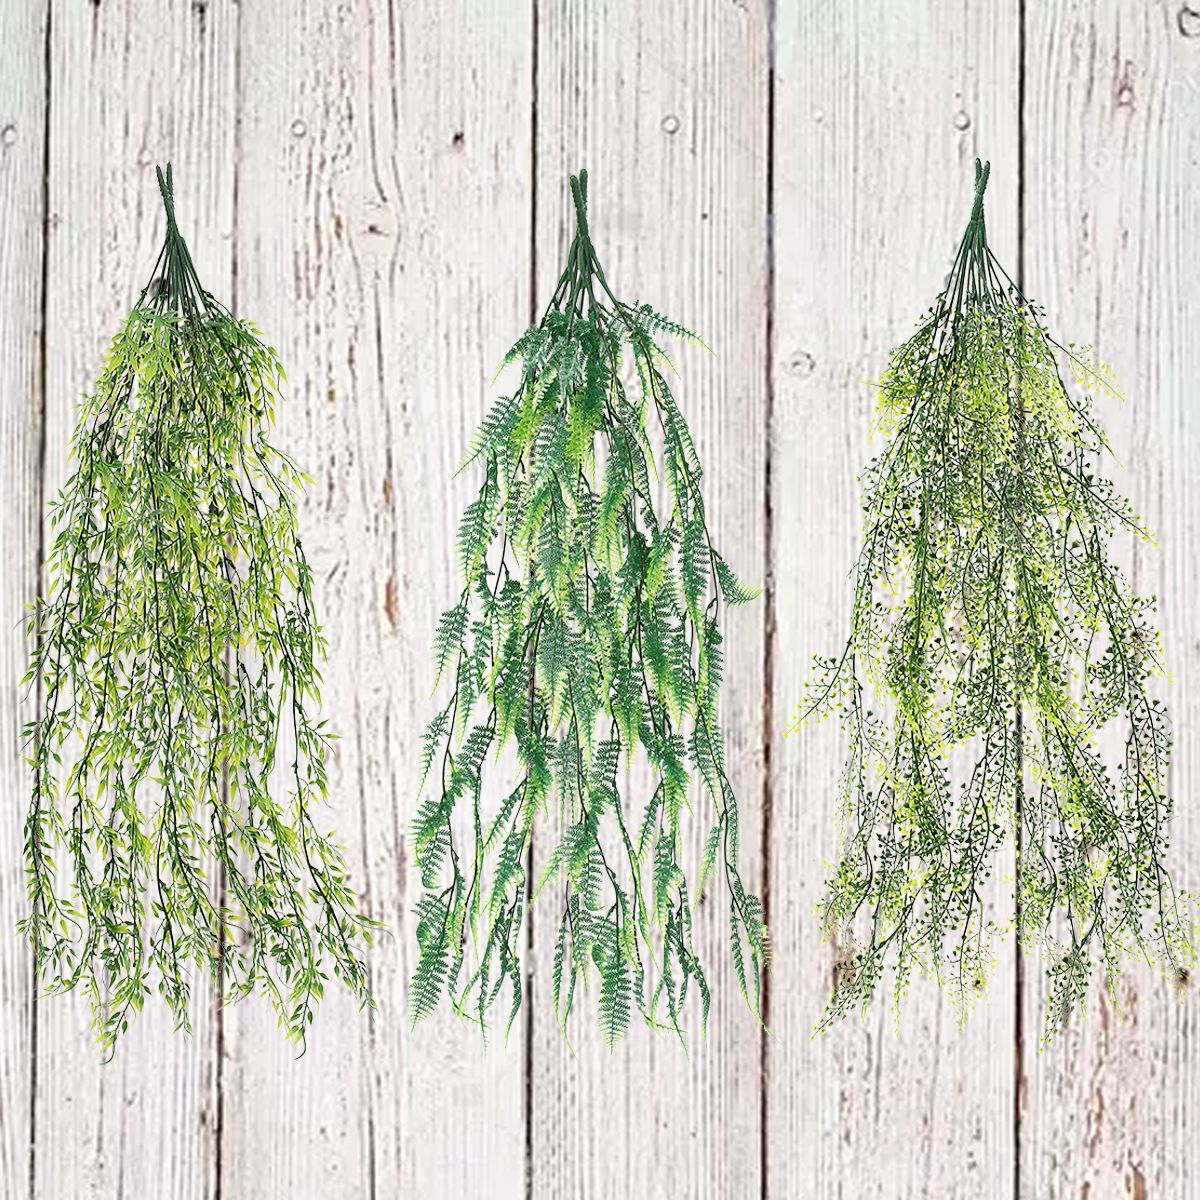 Wall-Hanging-Decorations-Artificial-Ivy-Plant-Outdoor-Garden-Home-Yard-Green-Decor-1496340